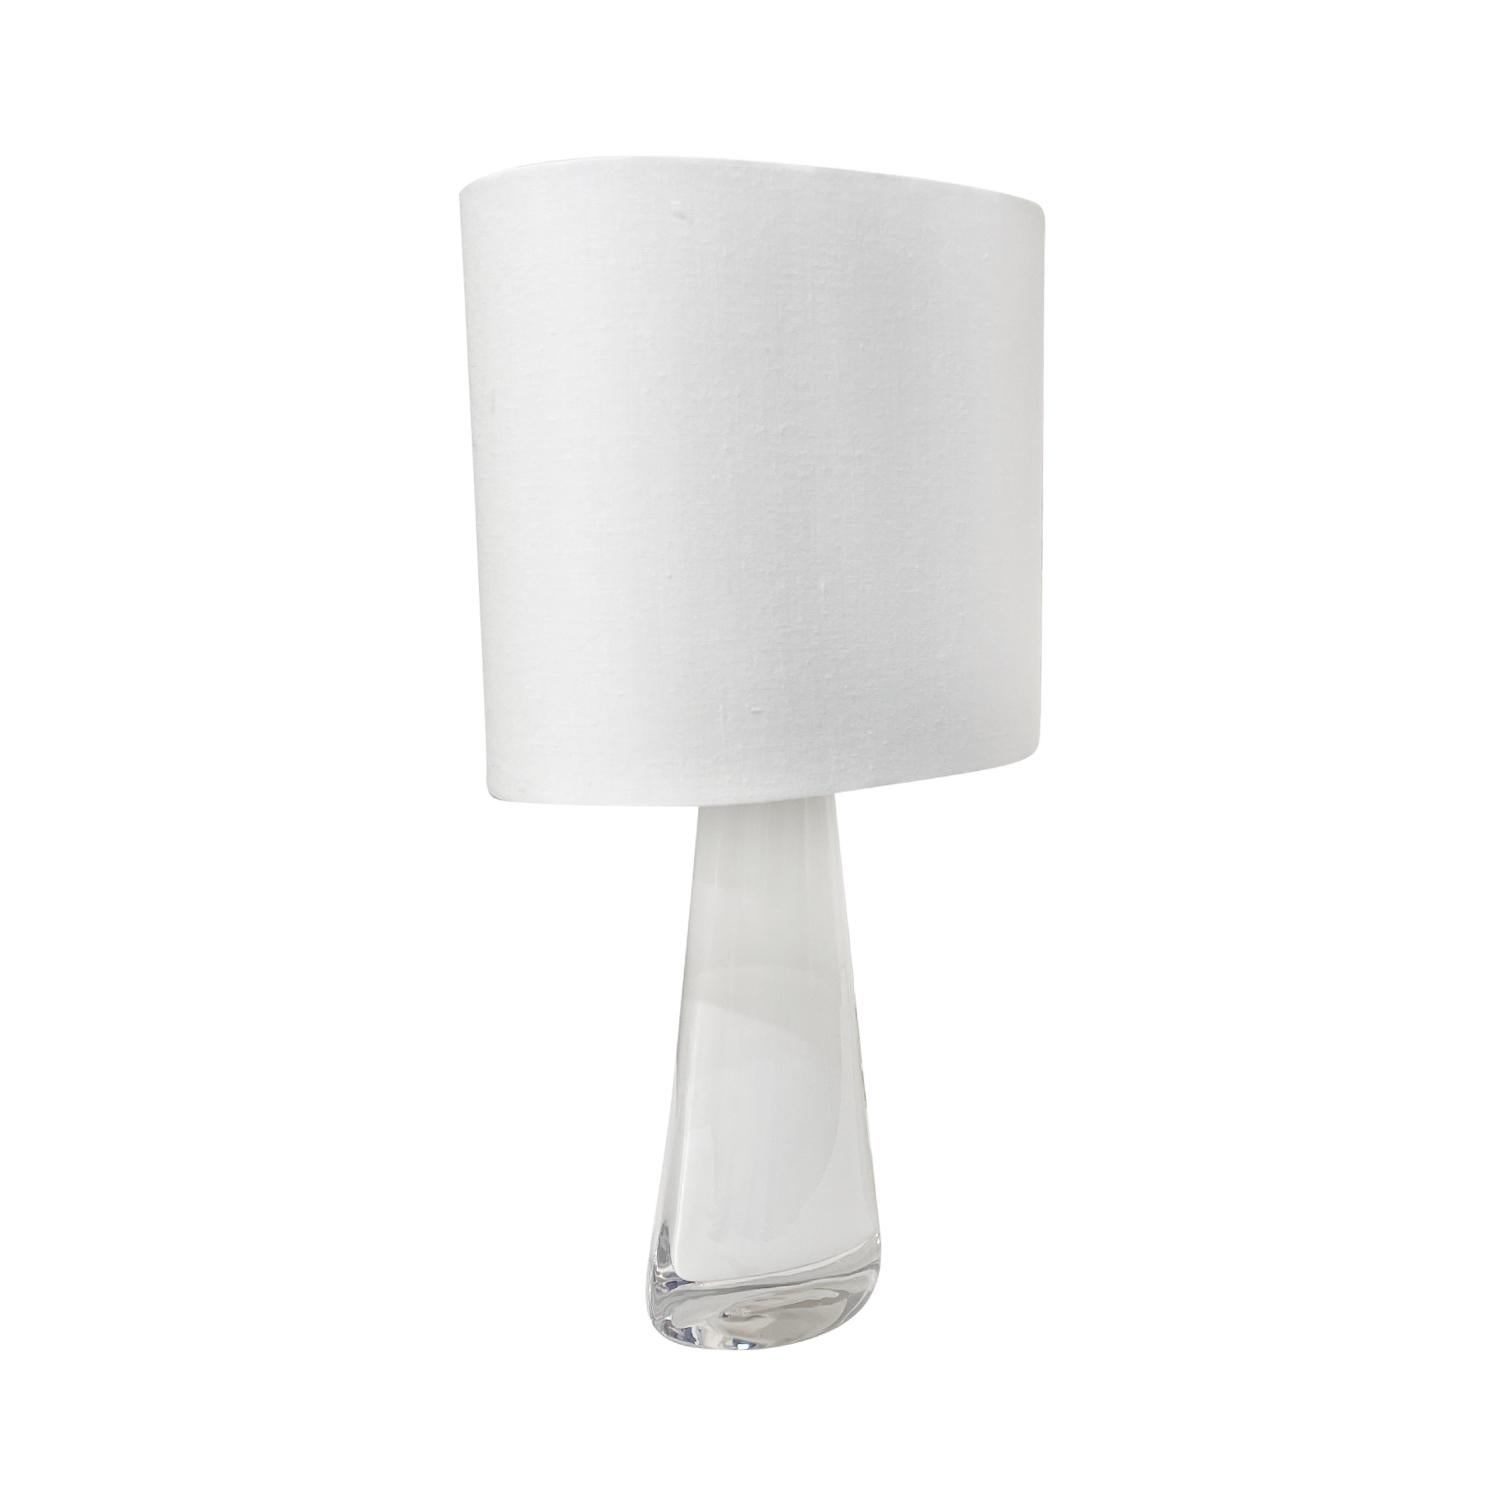 A half round, vintage Mid-Century Modern Swedish table lamp with a new white oval shade, made of hand blown Orrefors glass, the beam is enhanced with a chrome ring, featuring a one light socket in good condition. The white undercoat Scandinavian